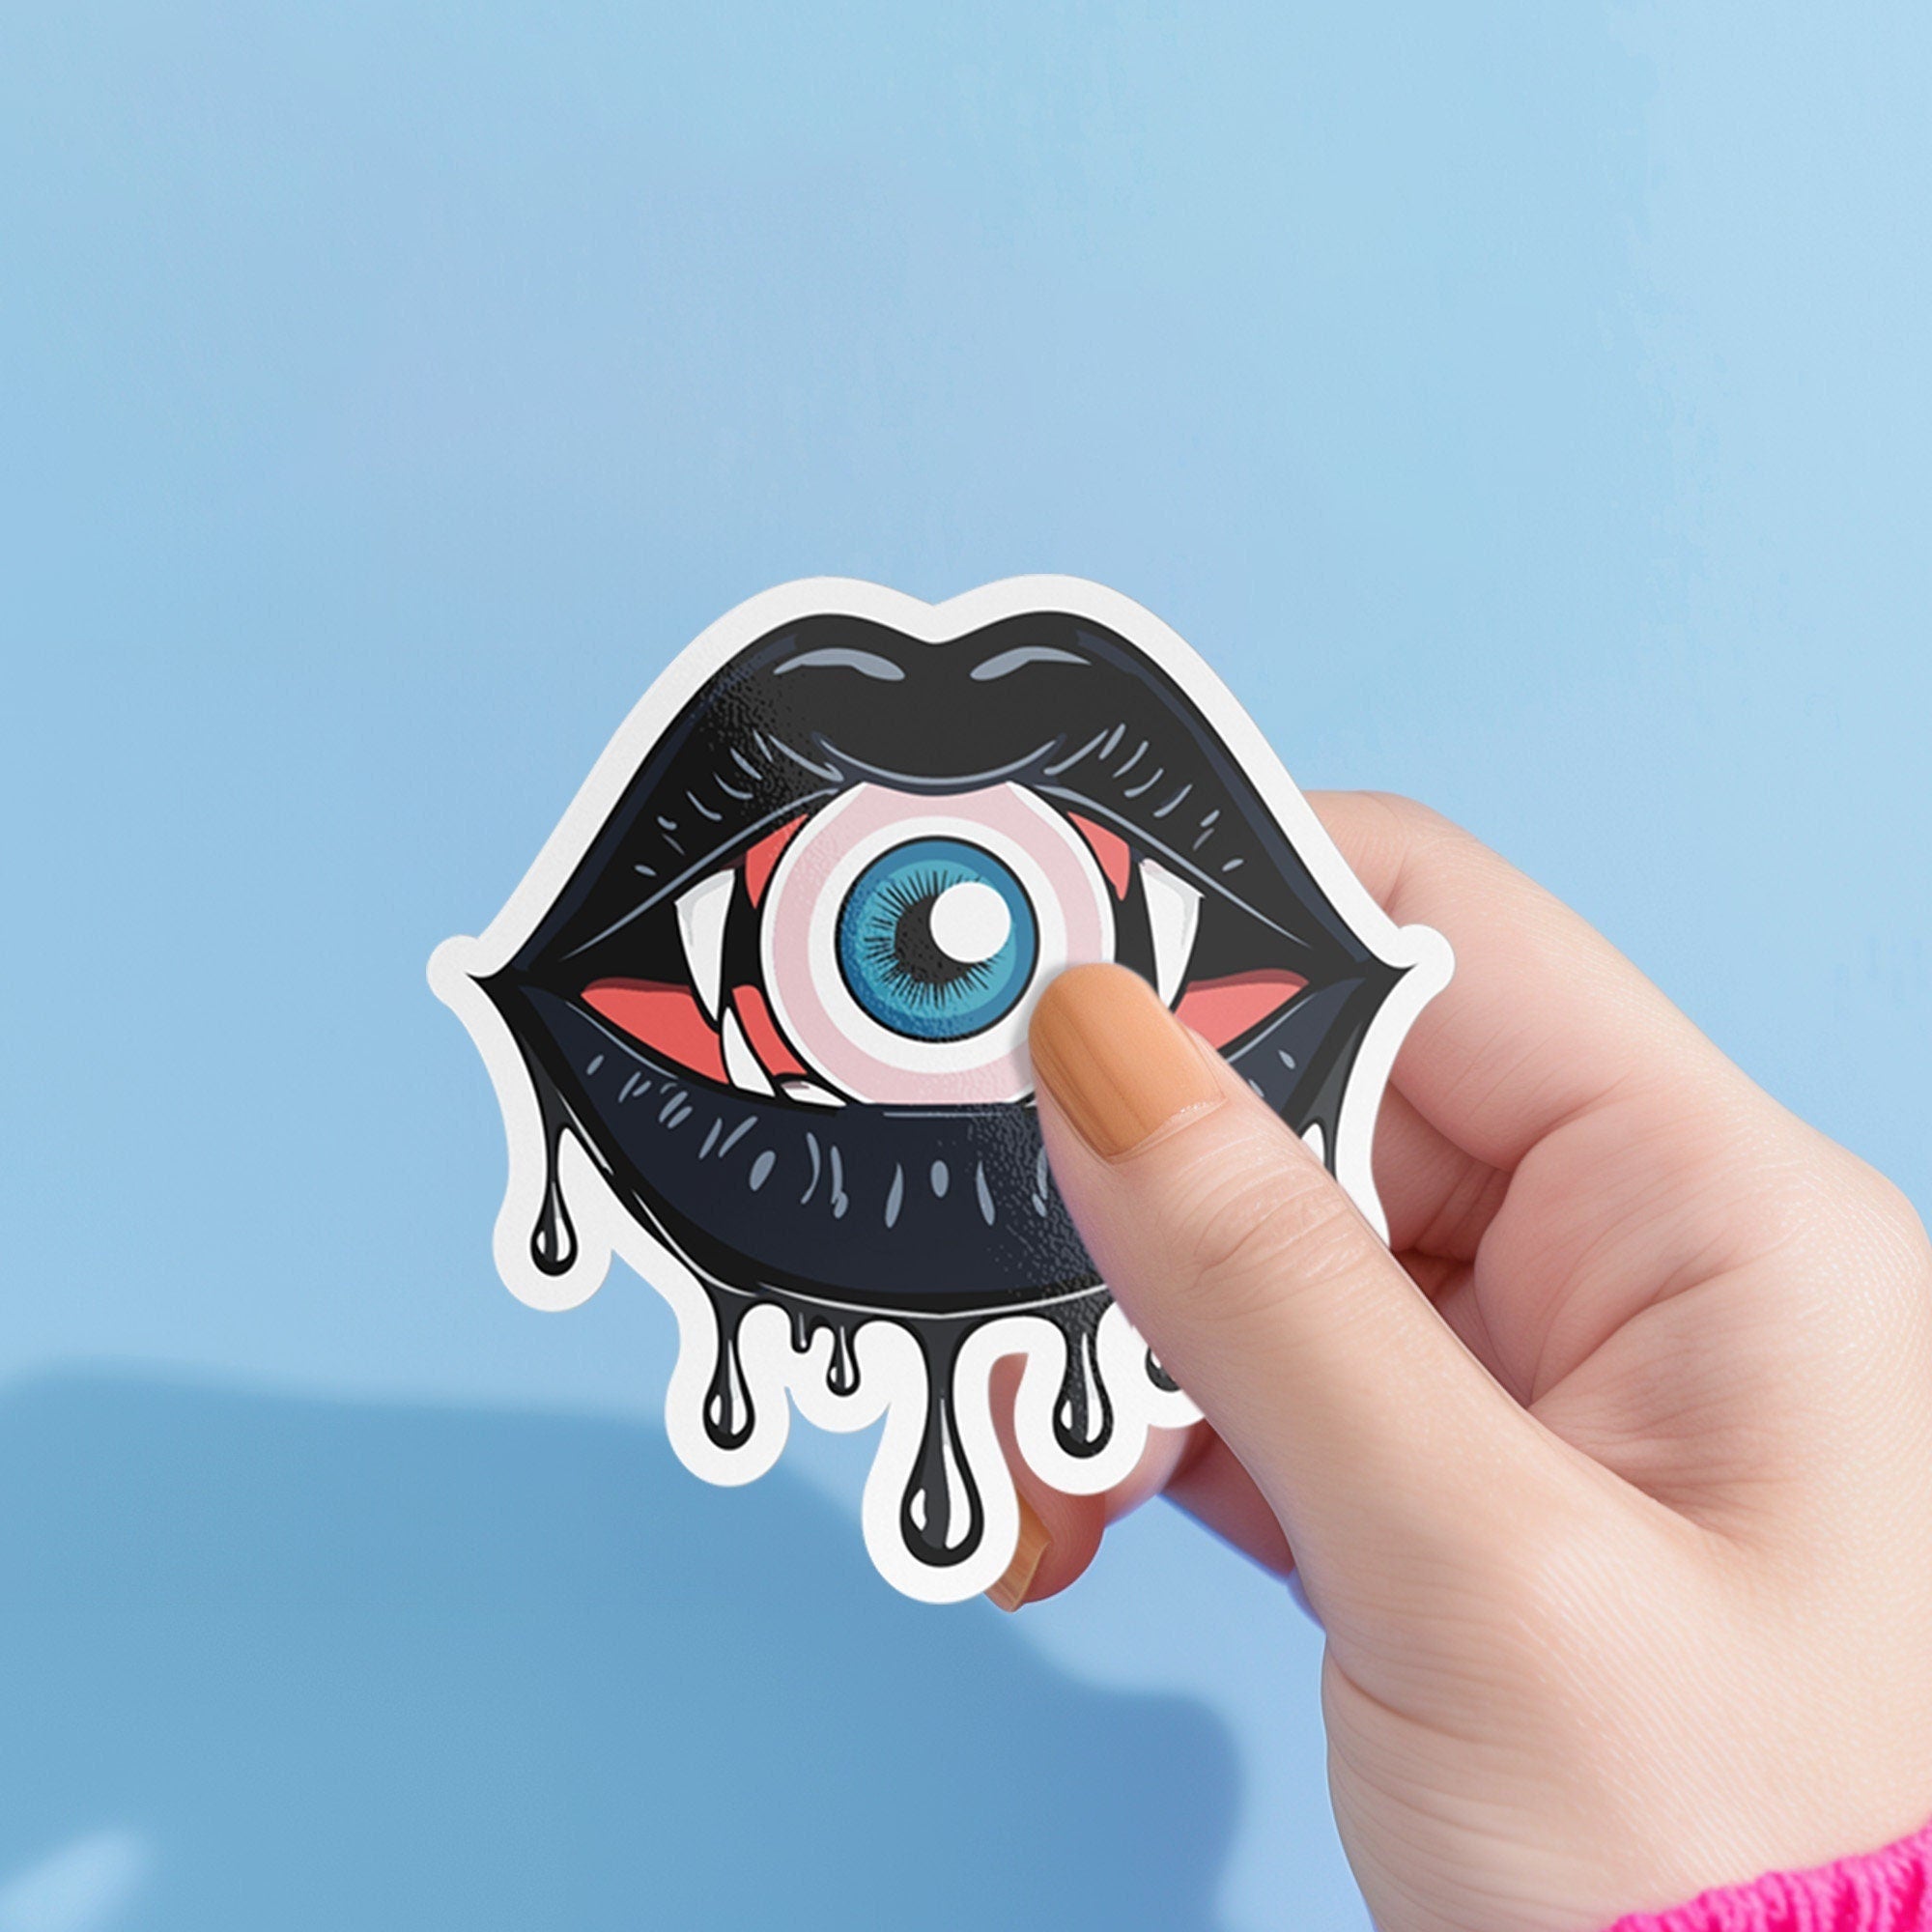 Eyeball vampire fangs sticker with black lips, perfect for adding a spooky touch to laptops, phones, and water bottles. Available in Prism, Gem, and Glitter finishes. Handmade in Austin, Texas.